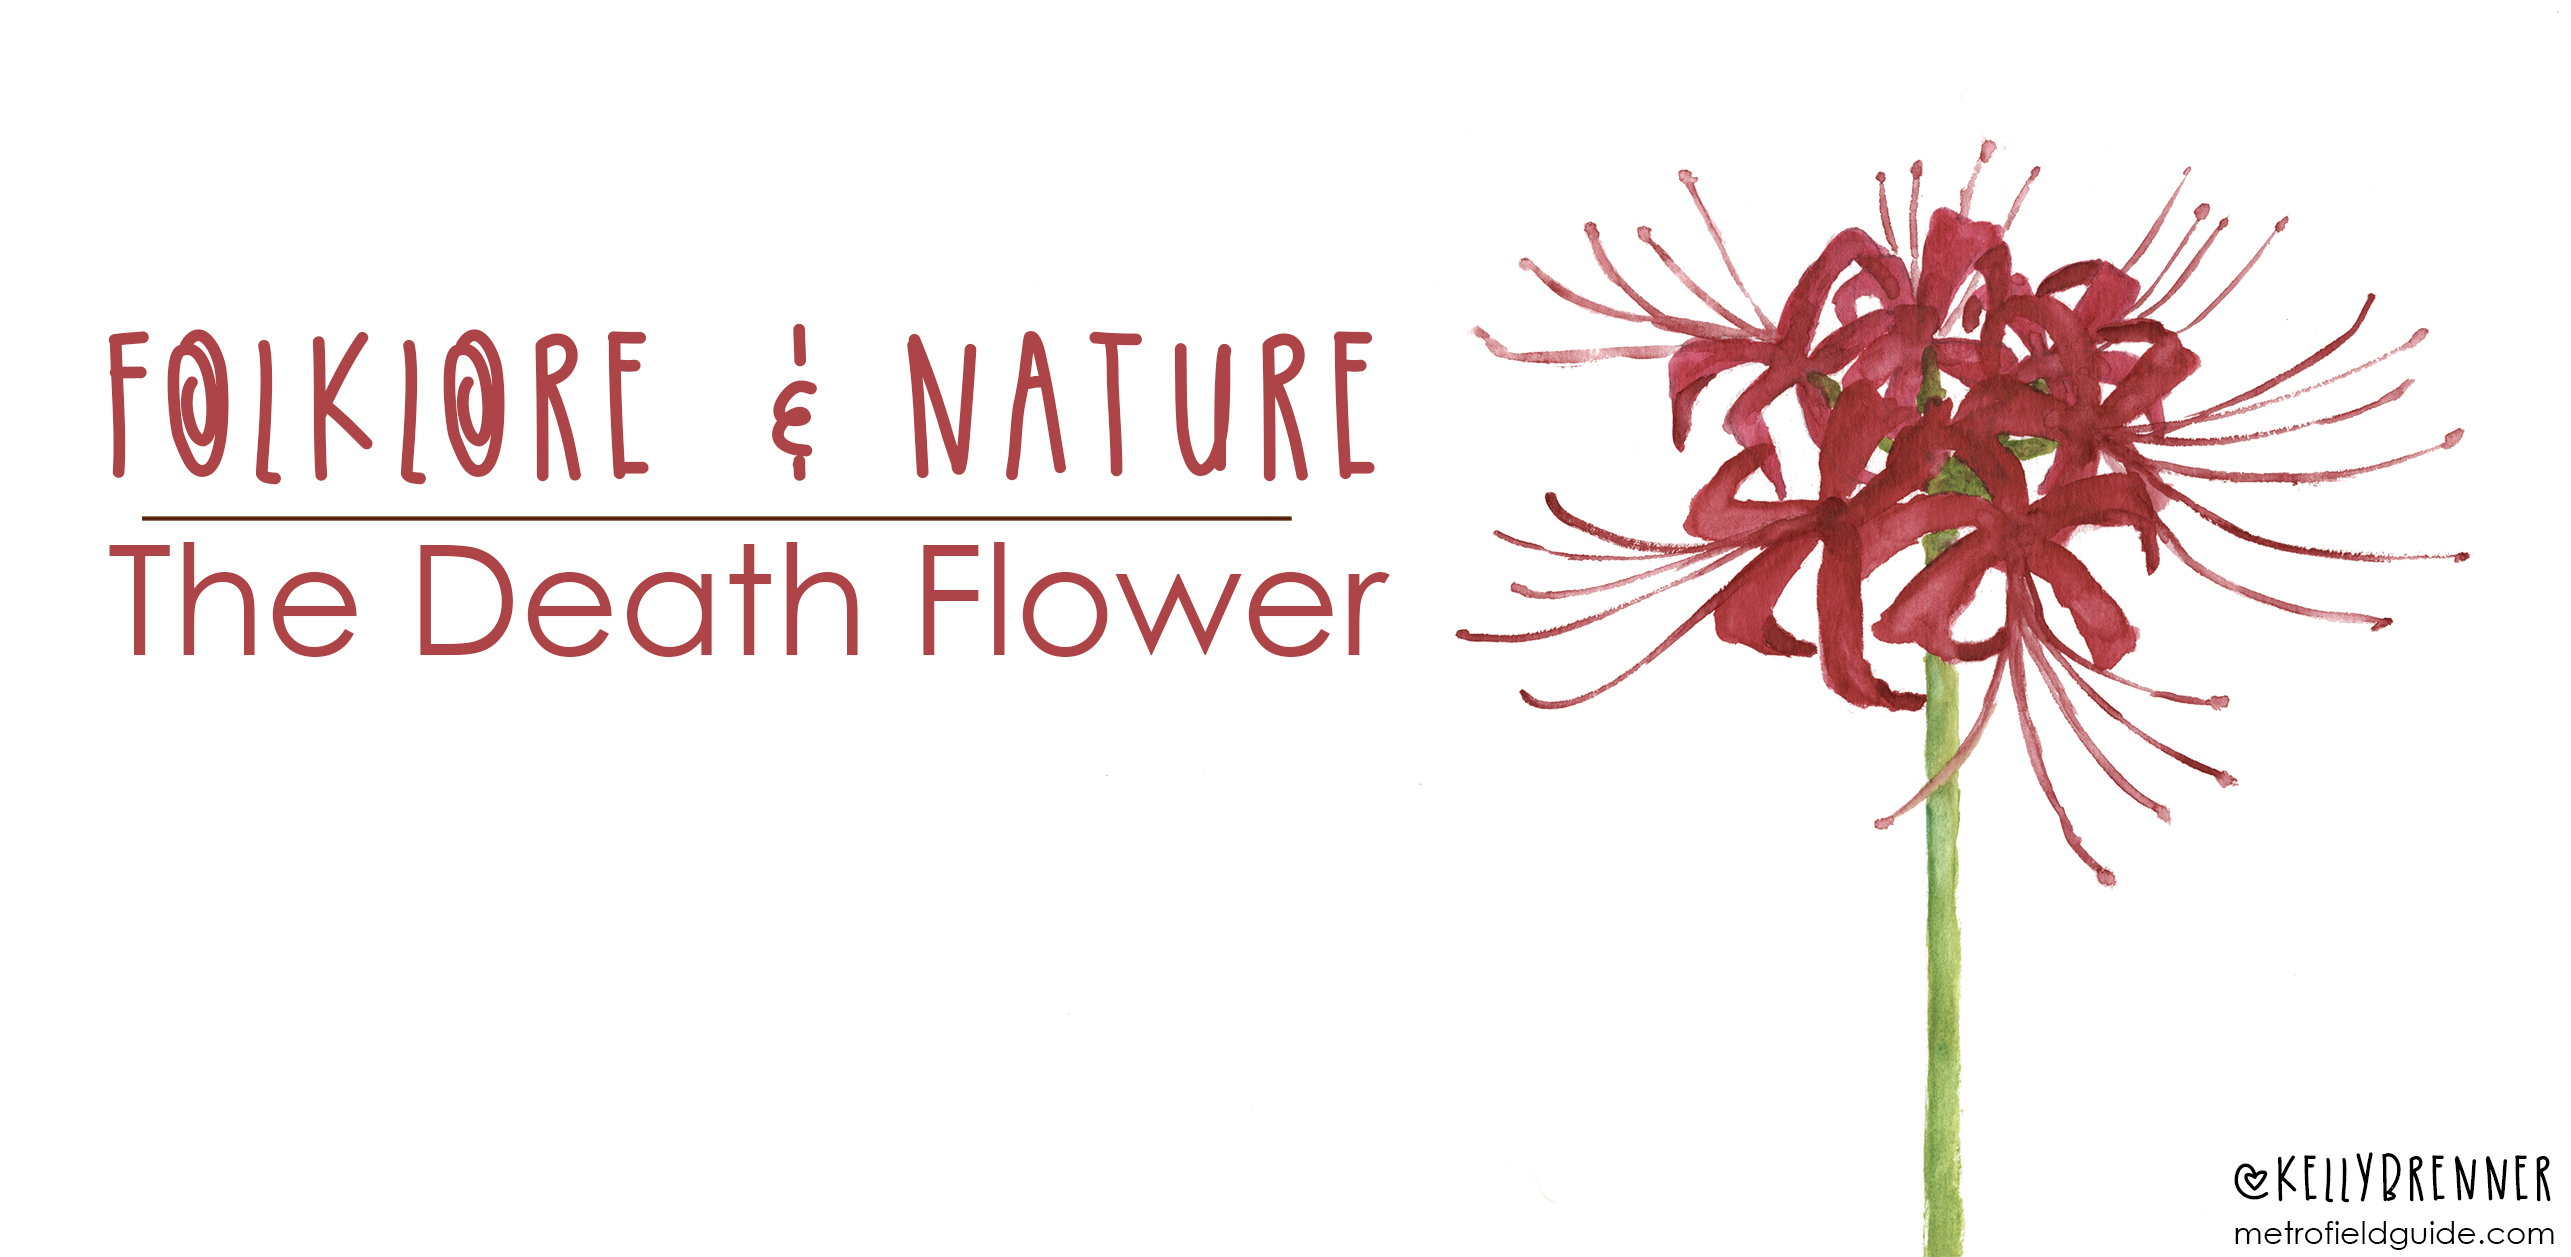 Folklore Nature The Death Flower